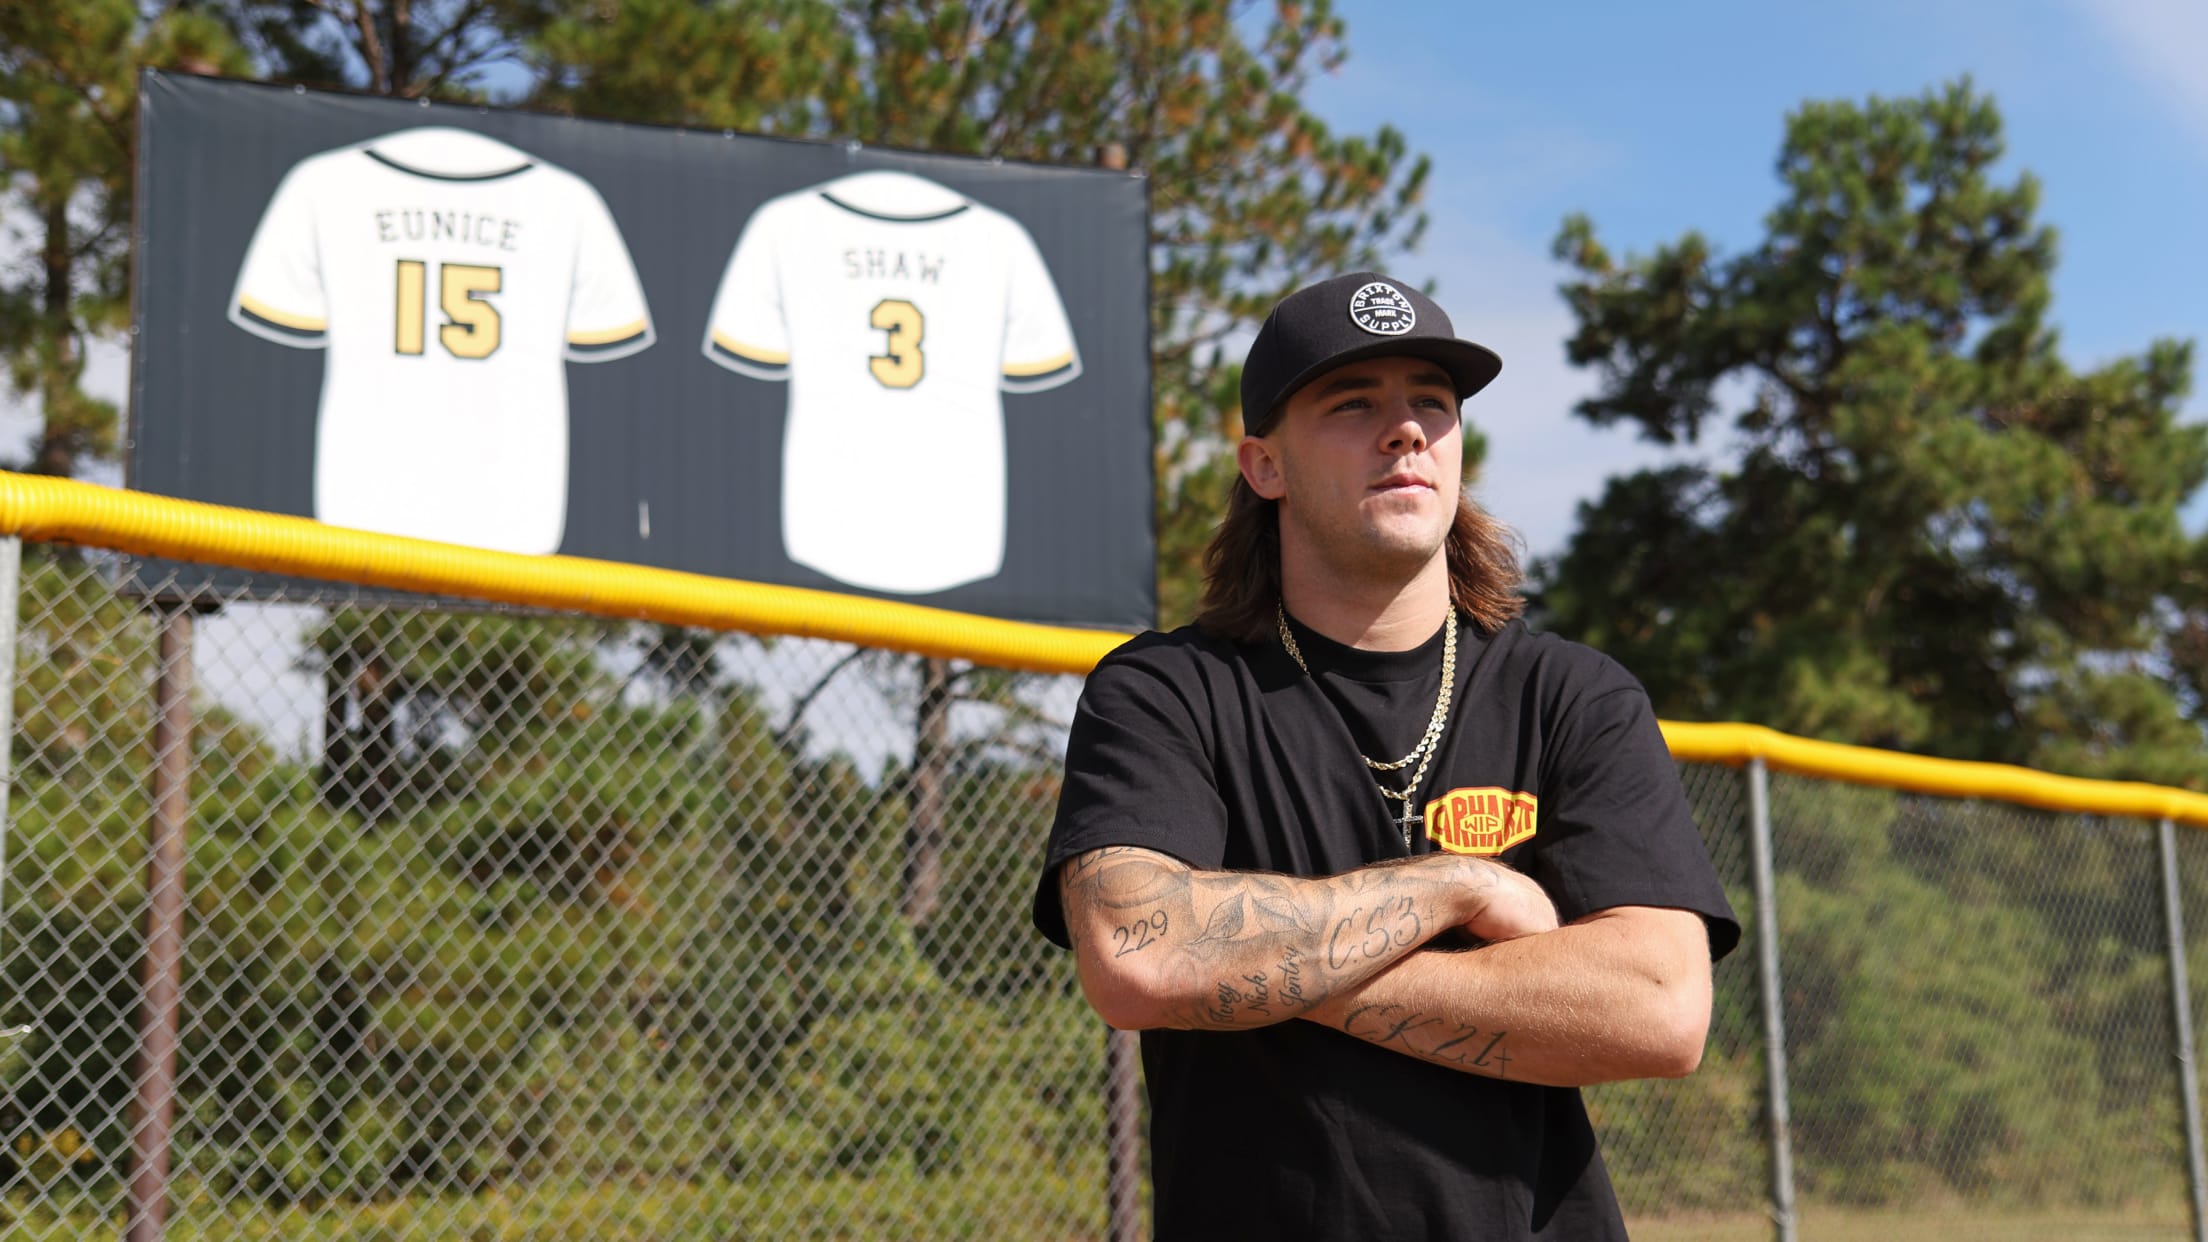 Hall posing with the two retired jerseys for the Valdosta Wildcat baseball team.  Shaw, number 3, died during Hall's sophomore season.  CS3 is tattooed on Hall's forearm in remembrance of his teammate.